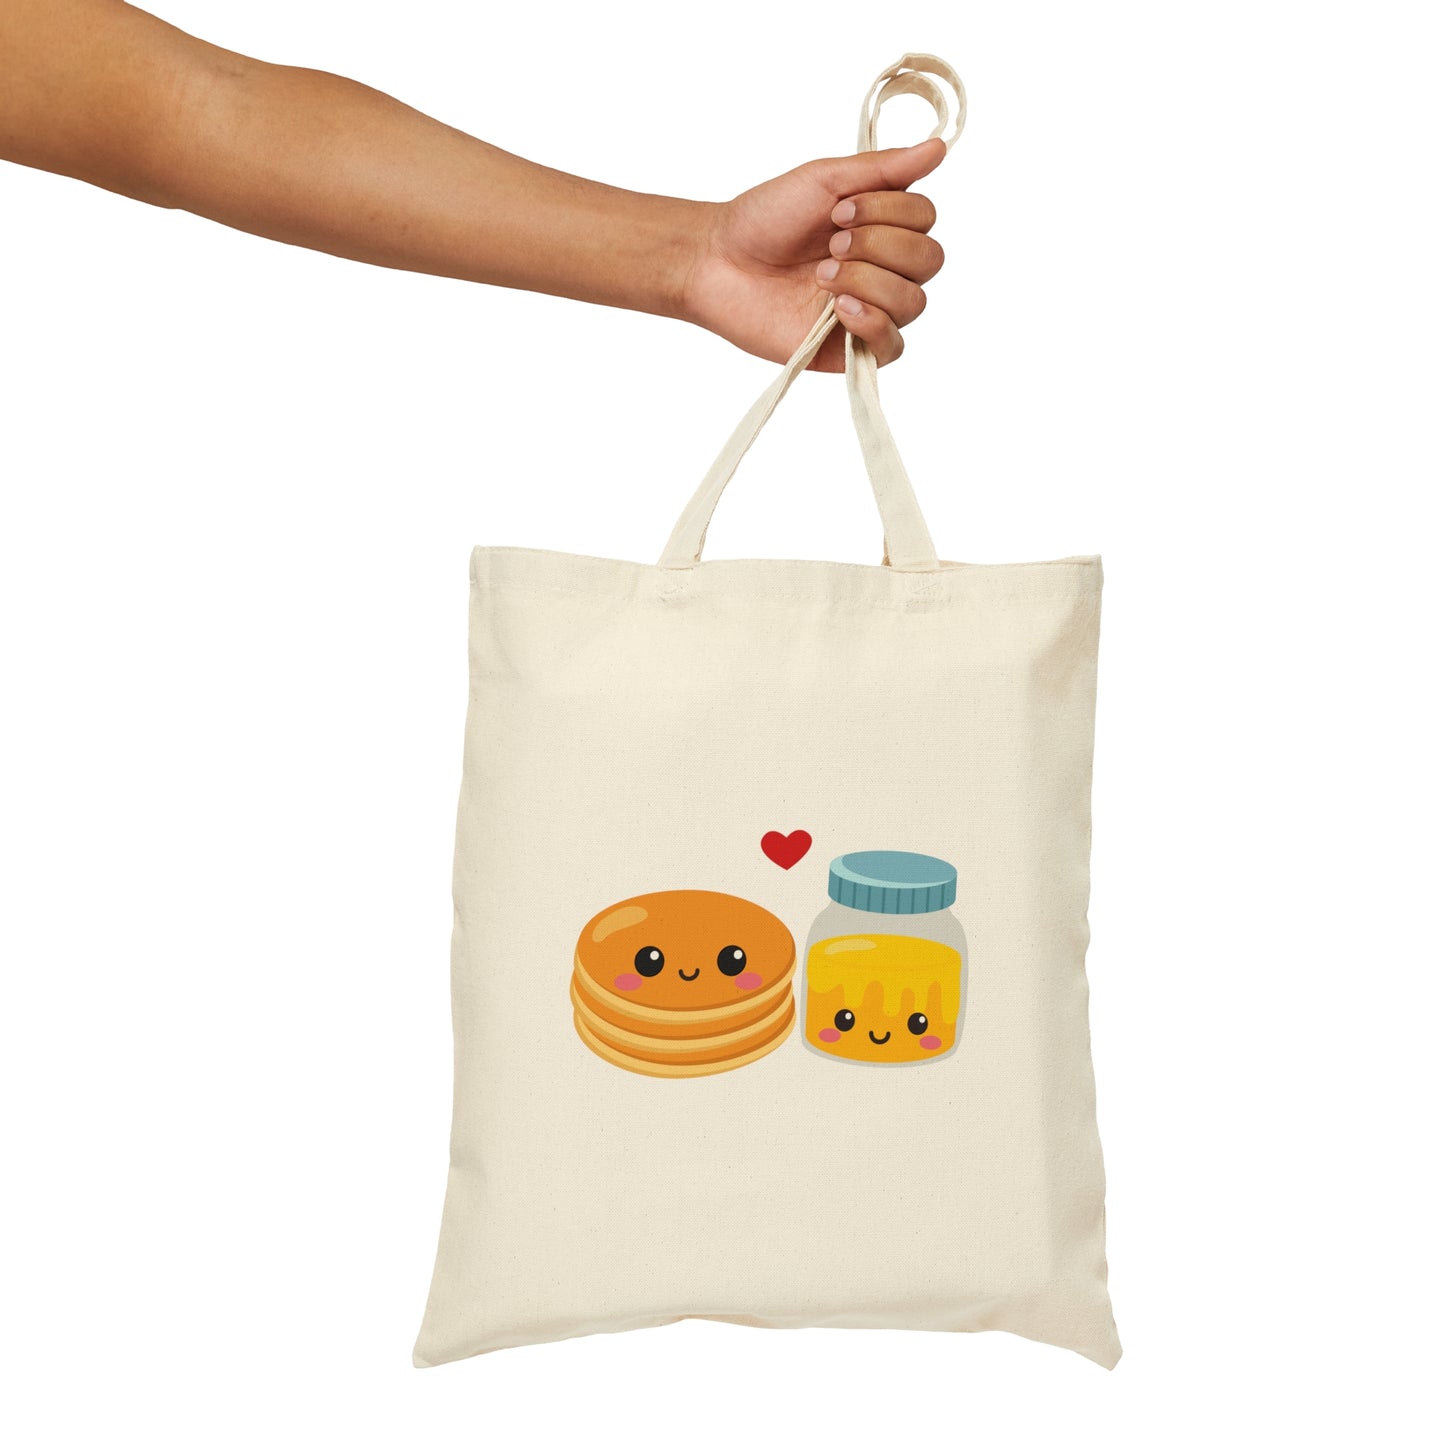 Pancake & Syrup perfect match Cotton Canvas Tote Bag